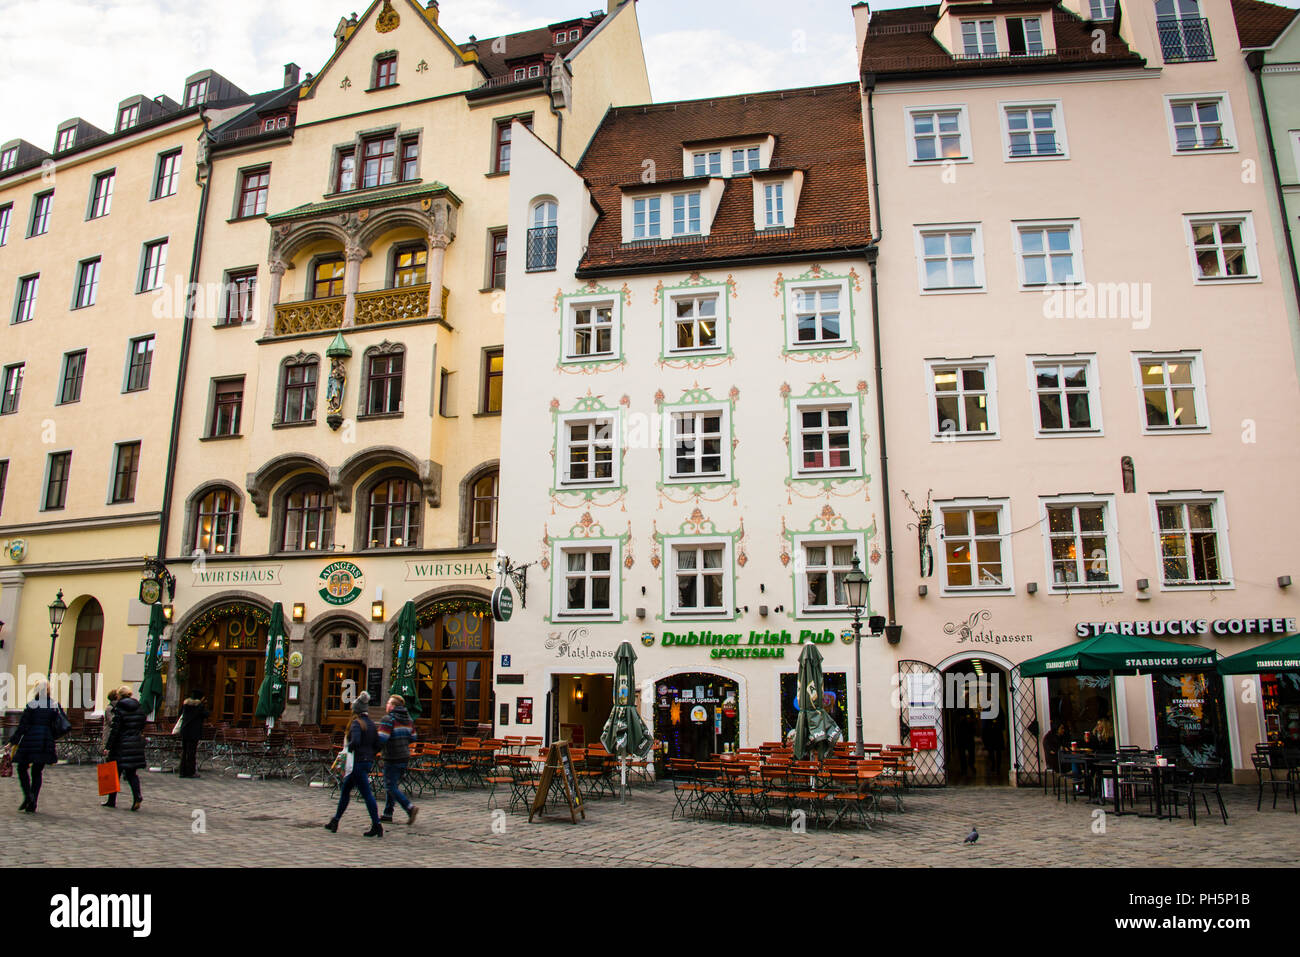 Platzl public square in old town Munich, Germany. Stock Photo